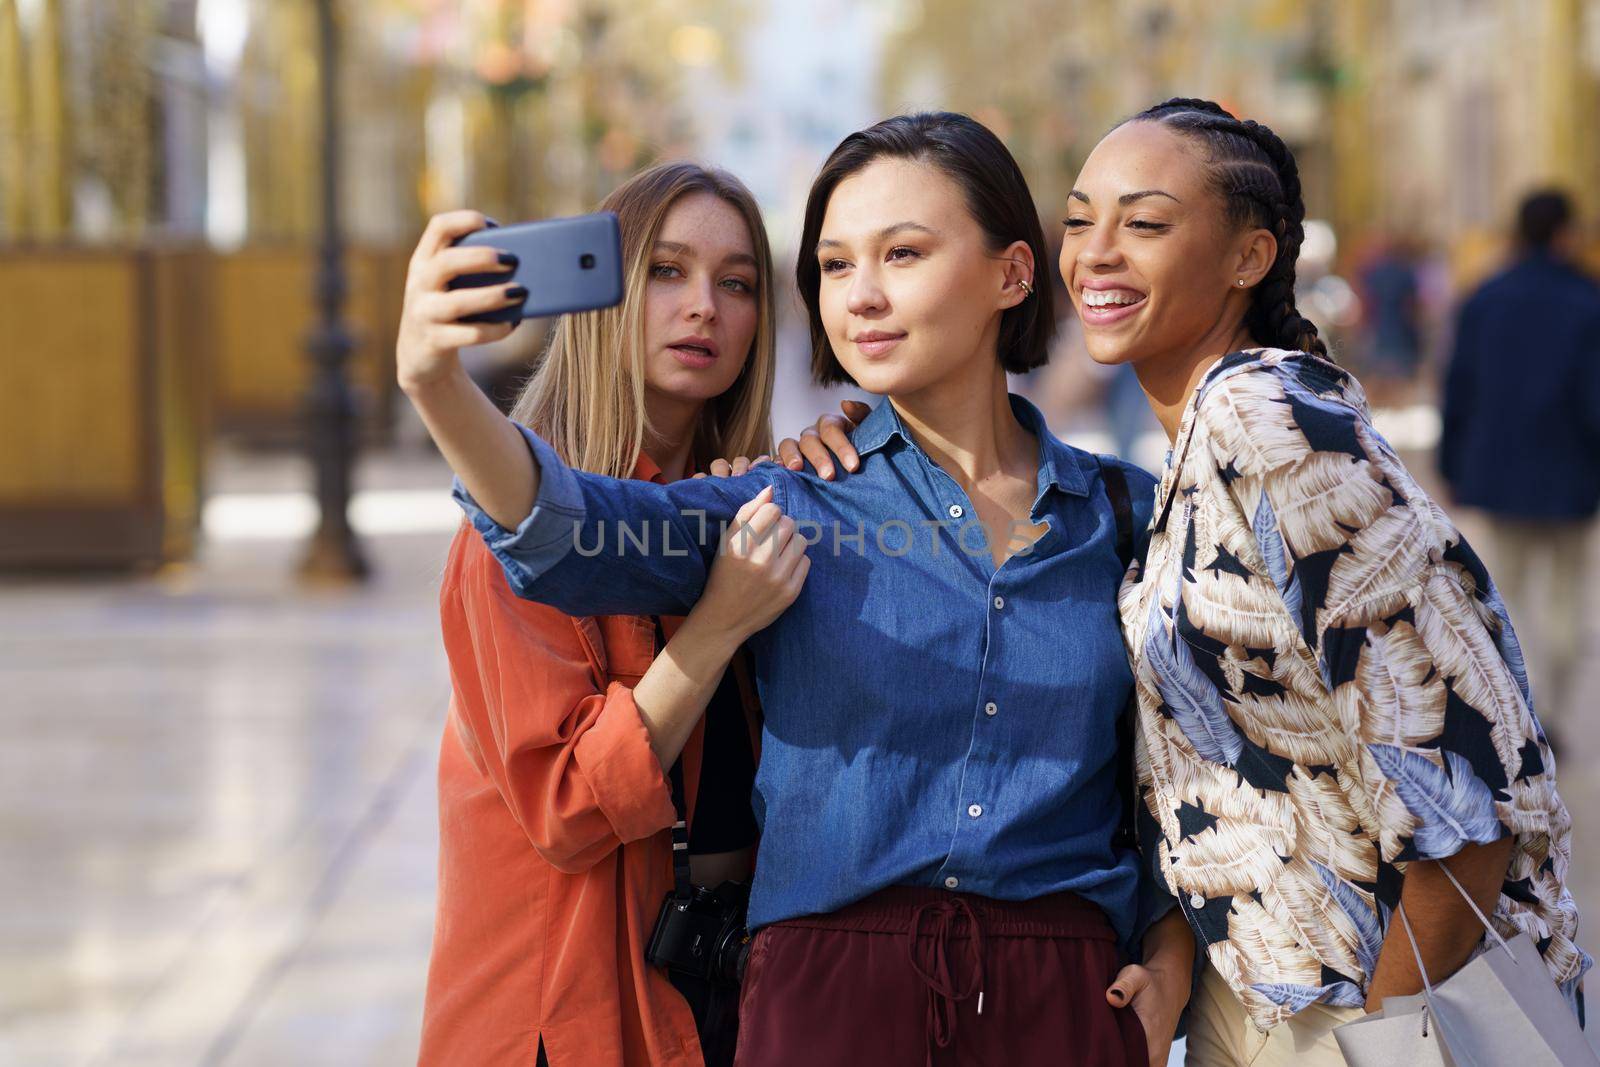 Content multiracial female friends taking self portrait on modern cellphone while standing together on sidewalk against blurred background of city